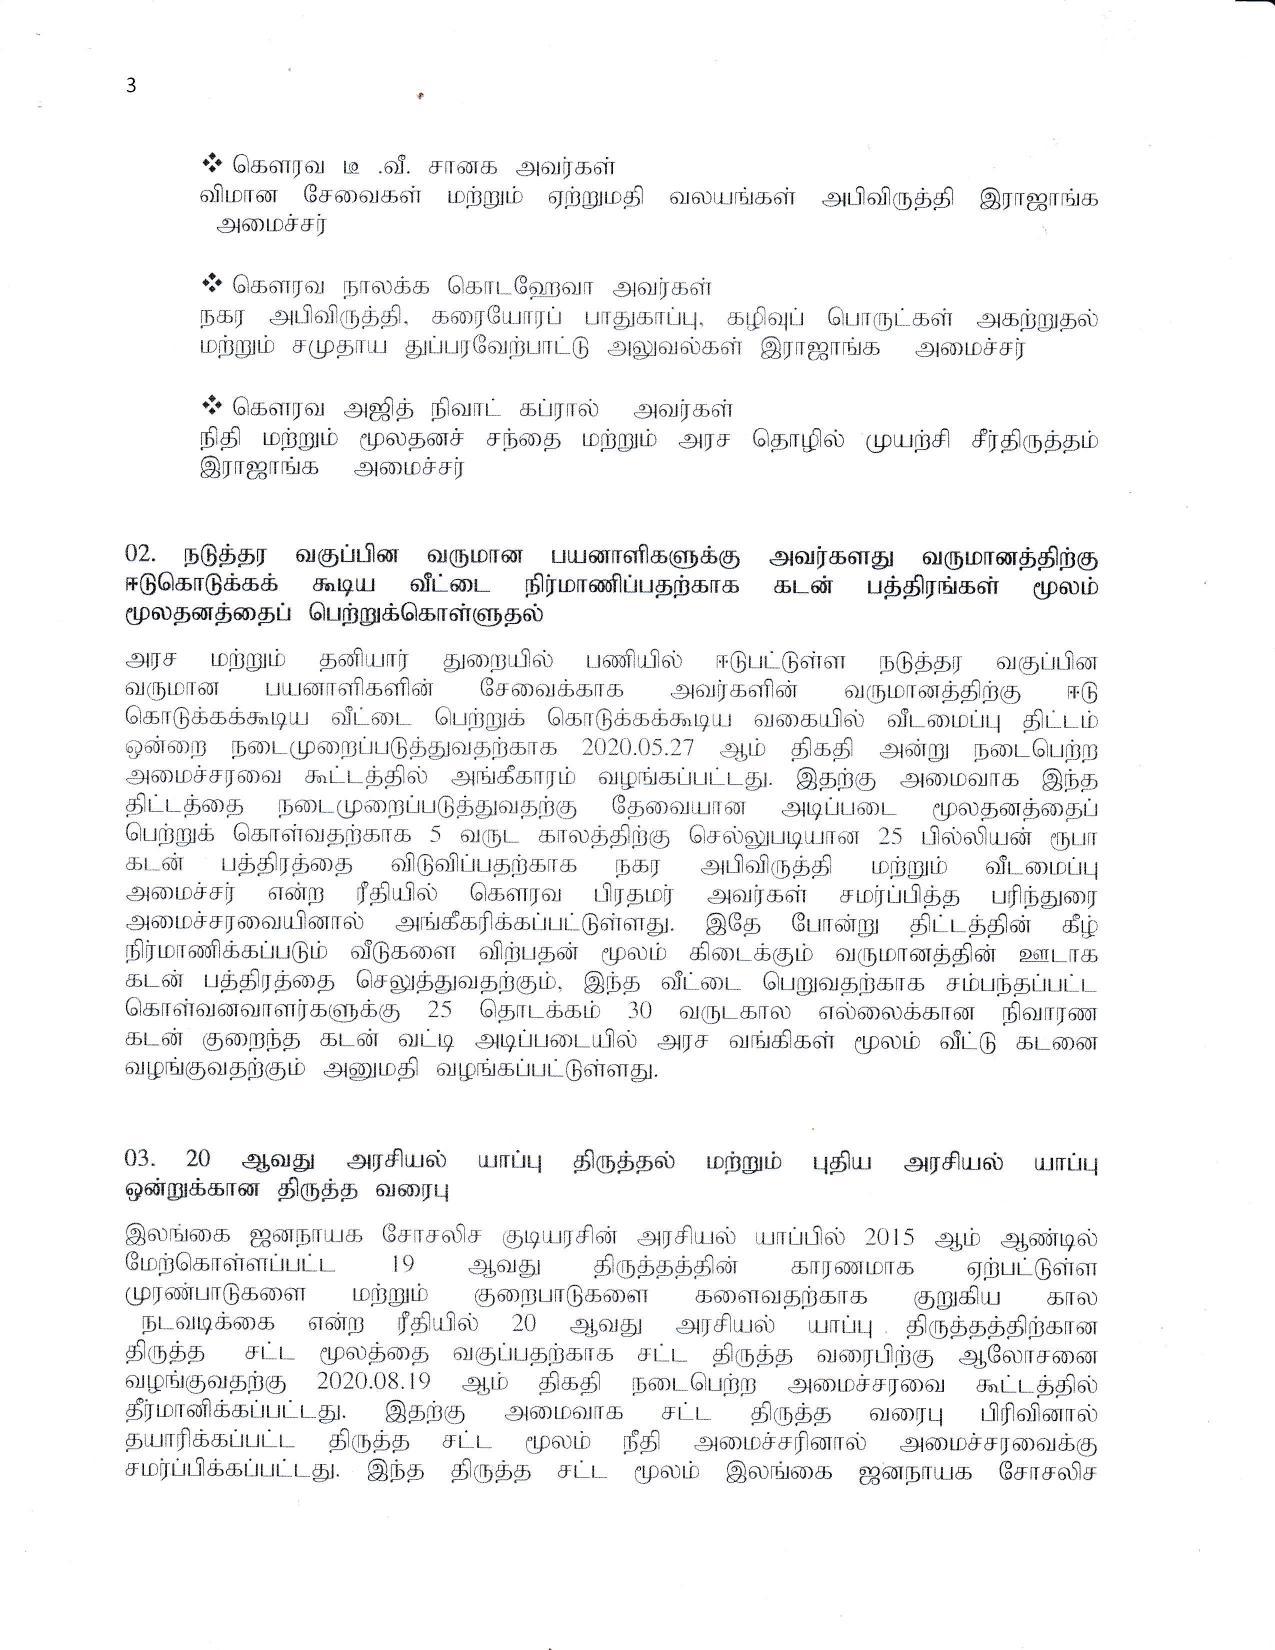 Cabinet Decision on 02.09.2020 Tamil min page 003